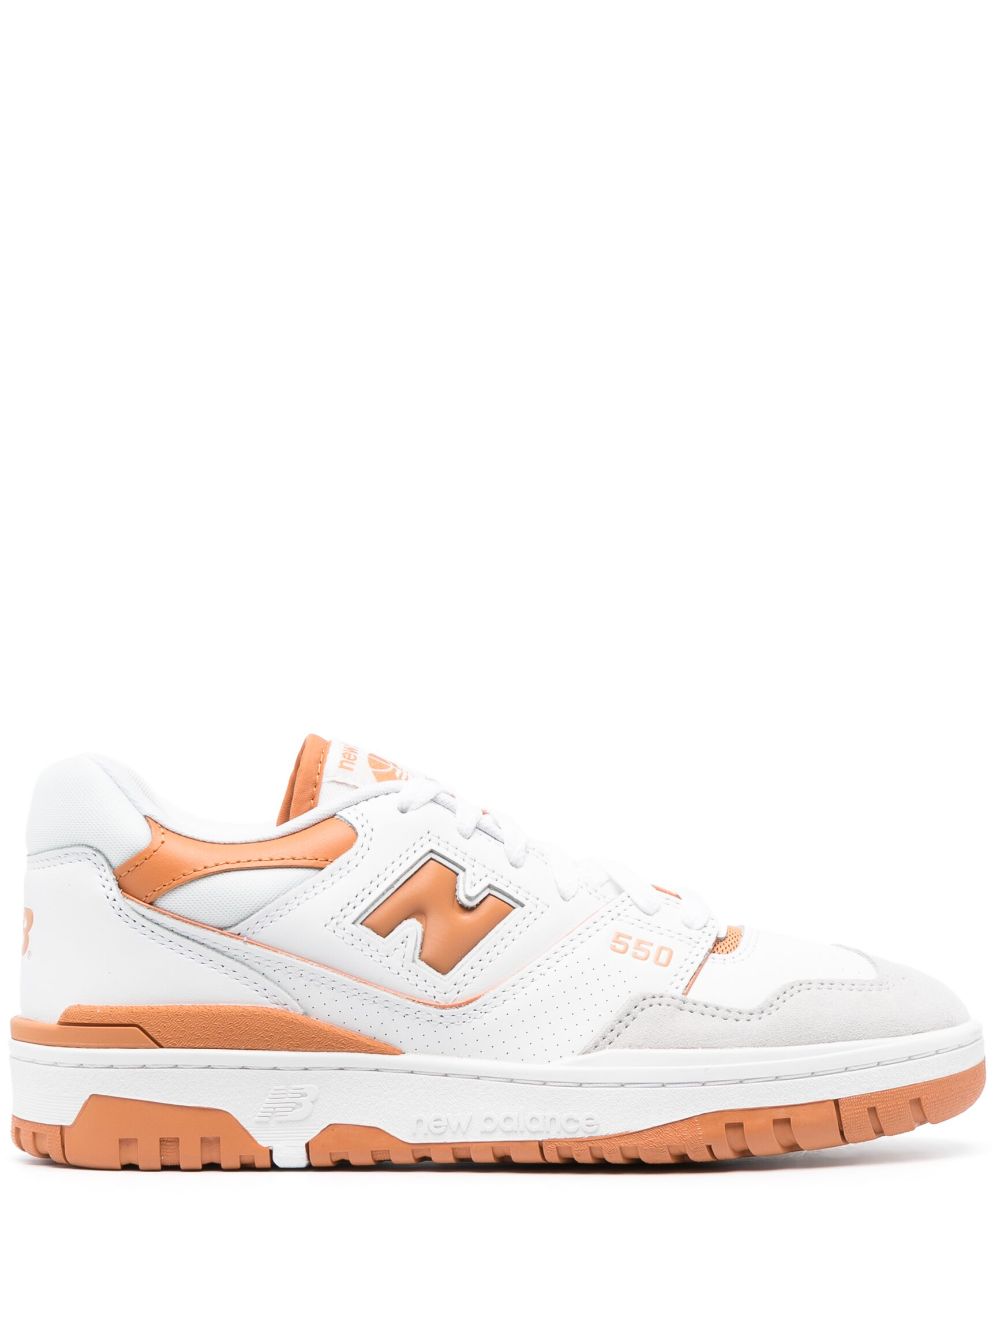 NEW BALANCE BB550 LOW-TOP LEATHER SNEAKERS